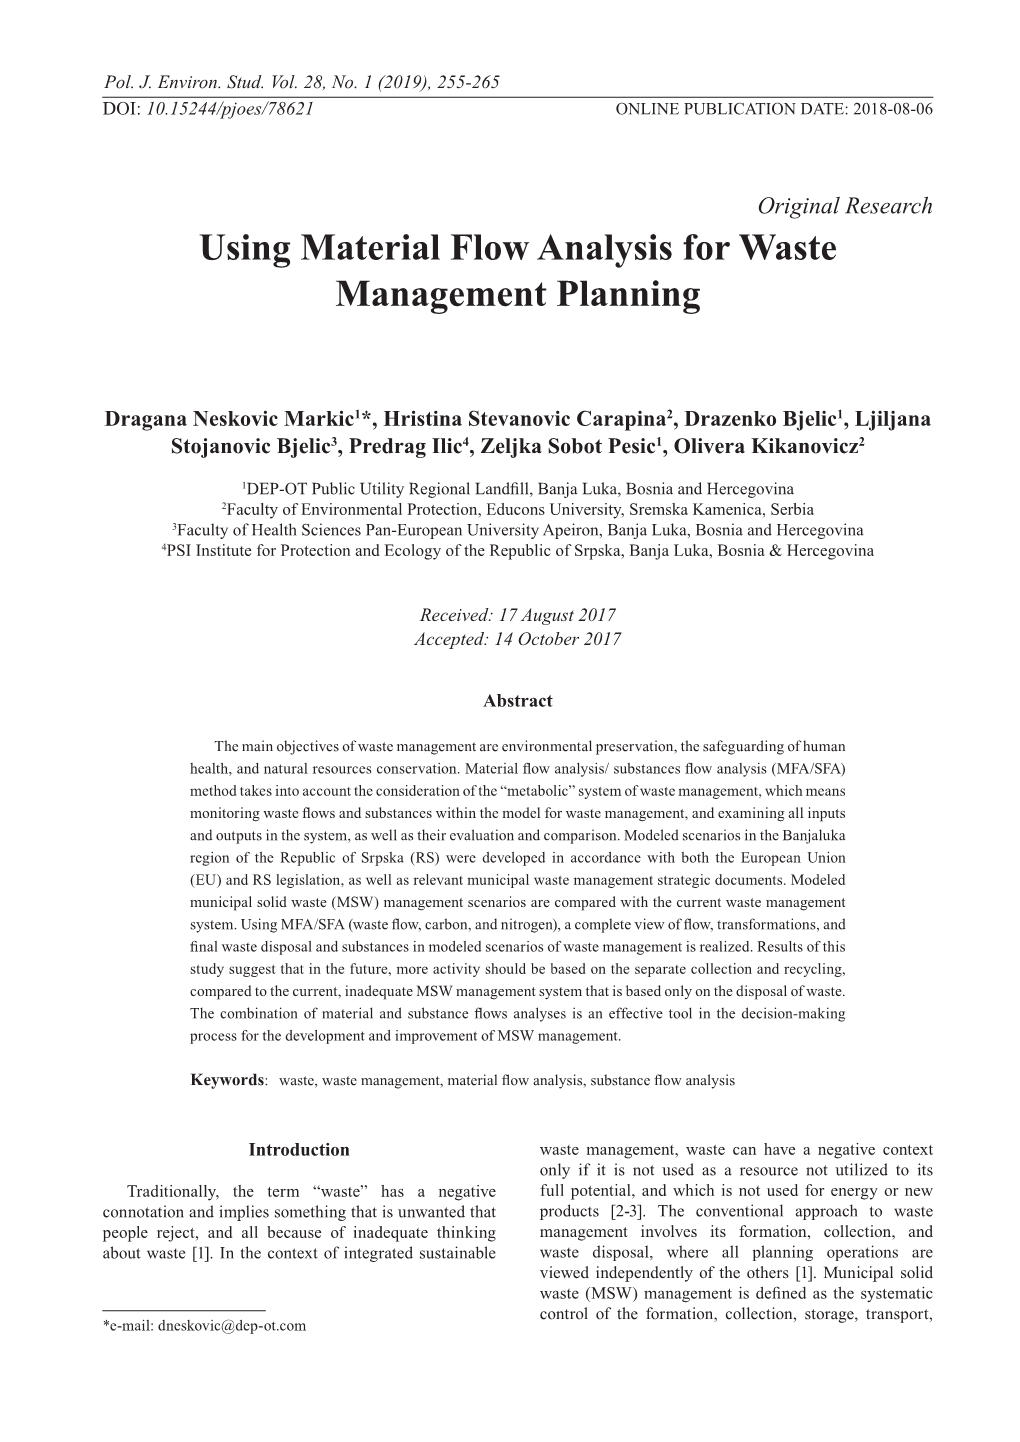 Using Material Flow Analysis for Waste Management Planning